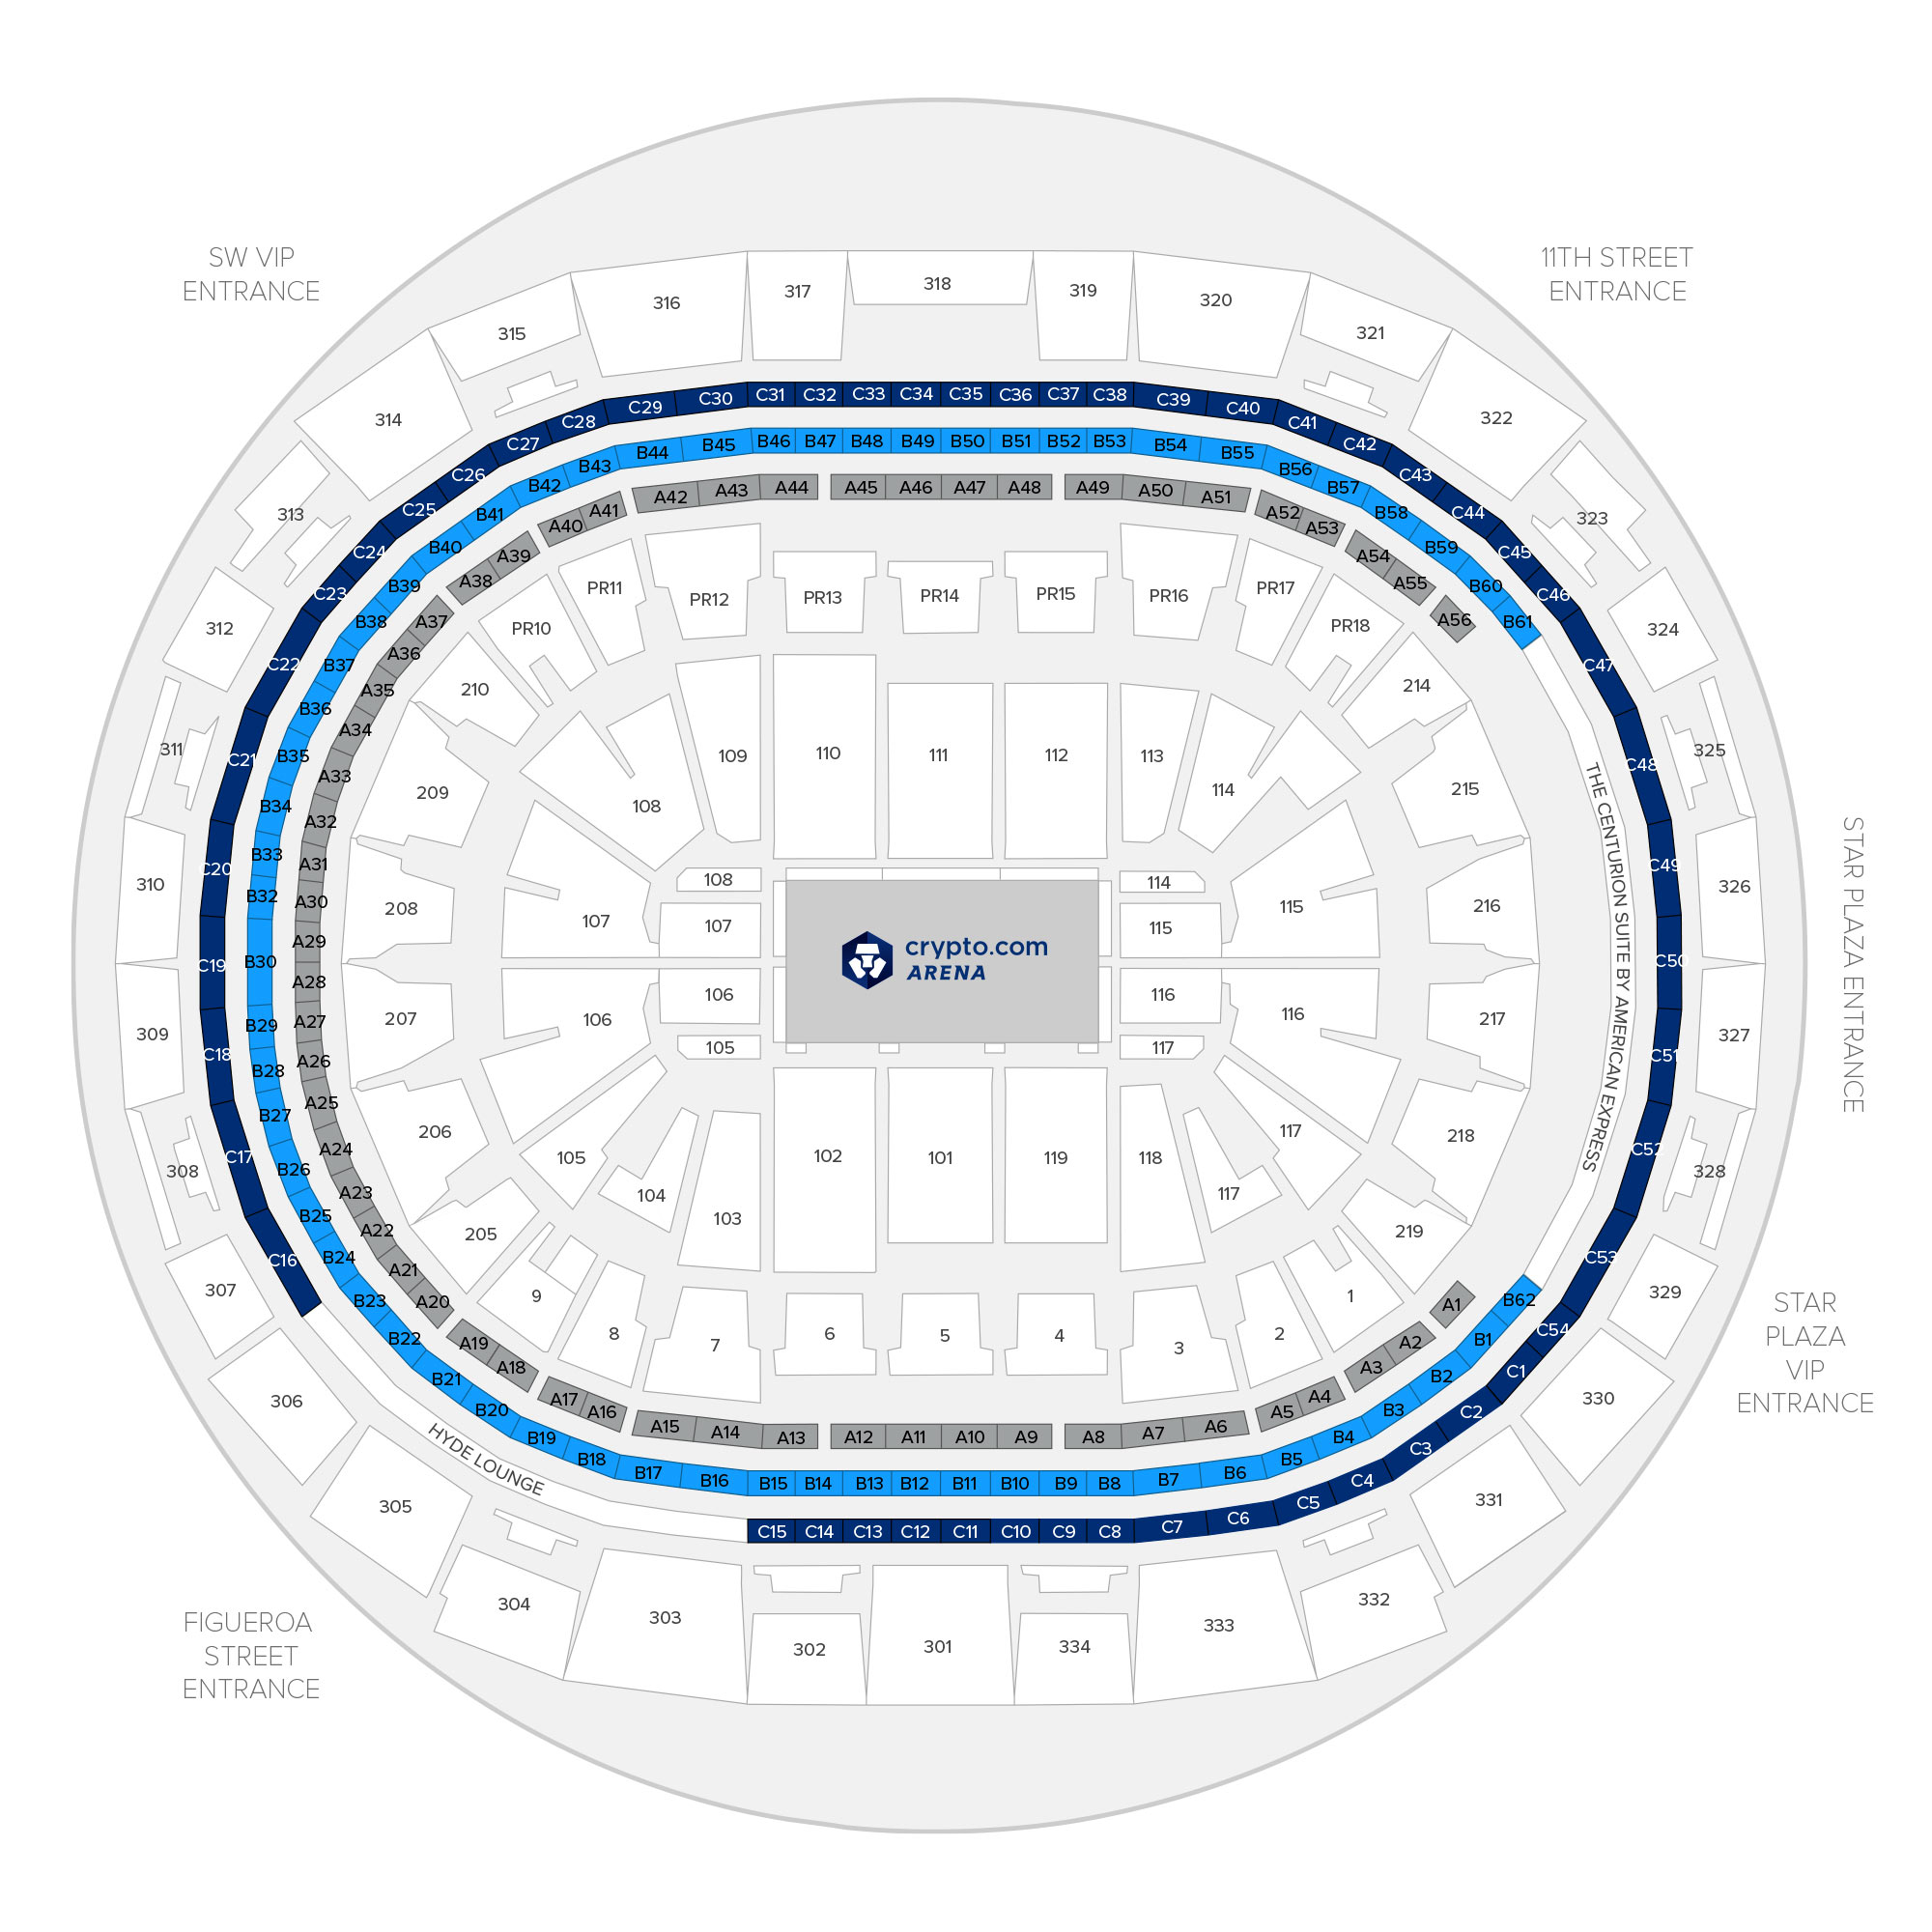 Crypto.com Arena (Formerly Staples Center) / Los Angeles Lakers Suite Map and Seating Chart